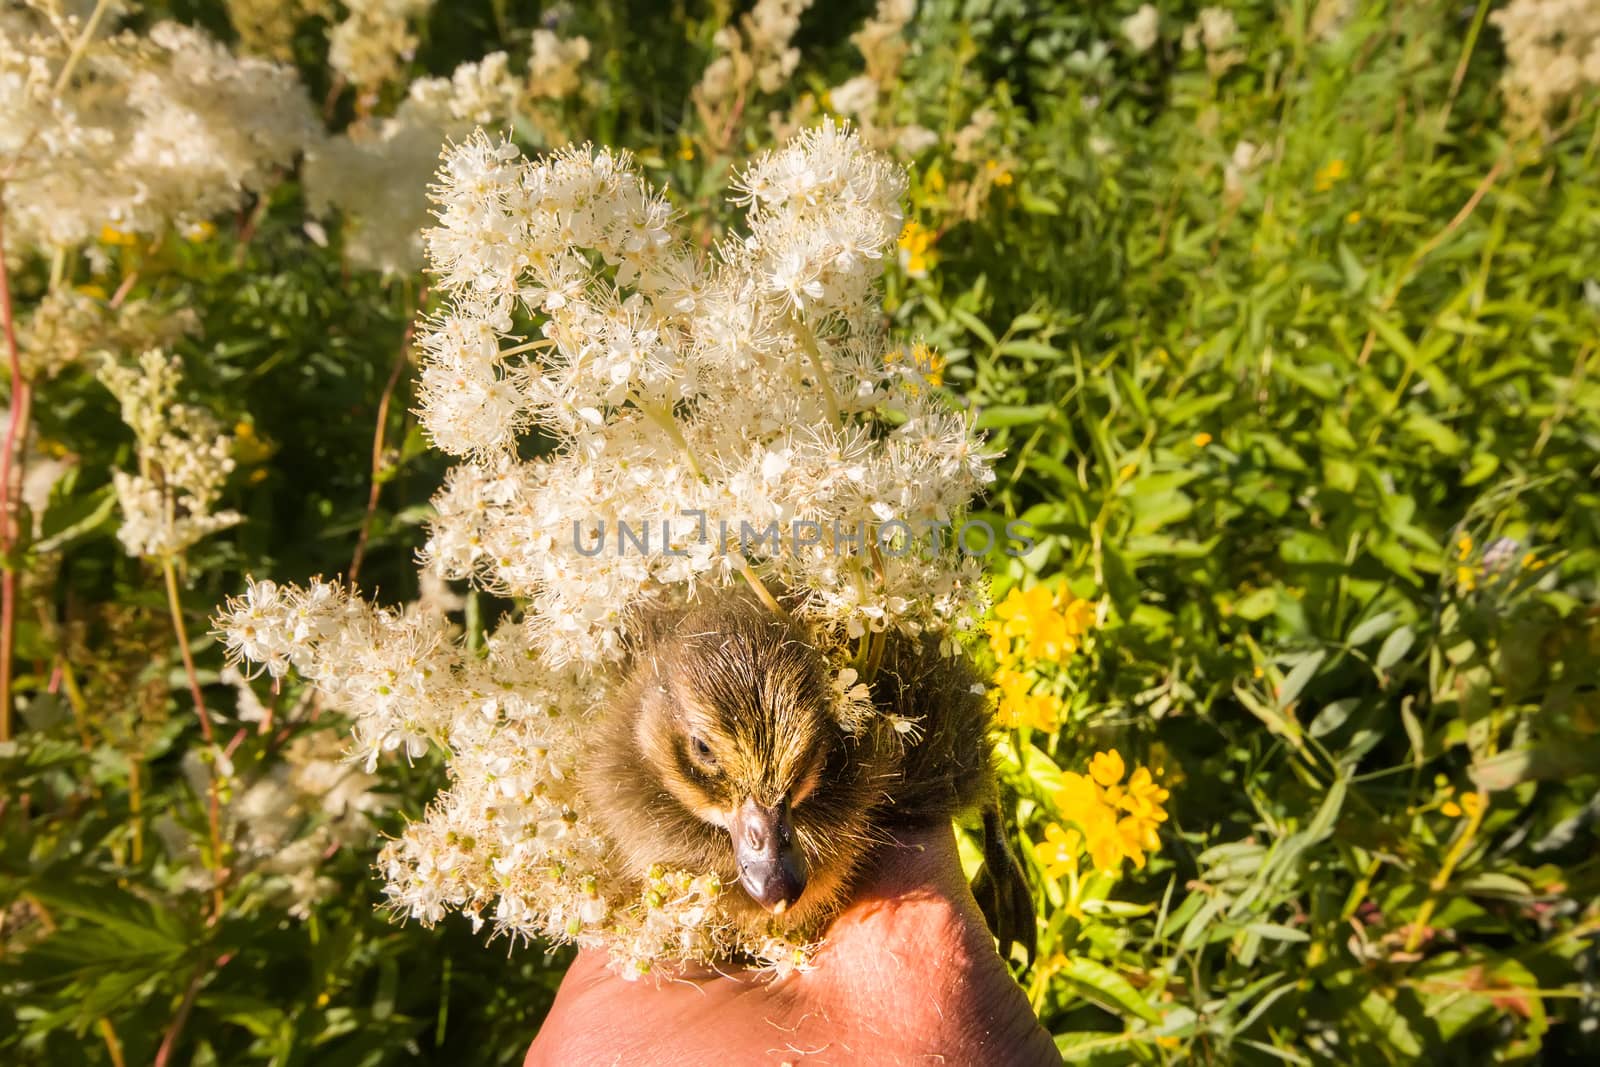 duckling among the wildflowers by max51288